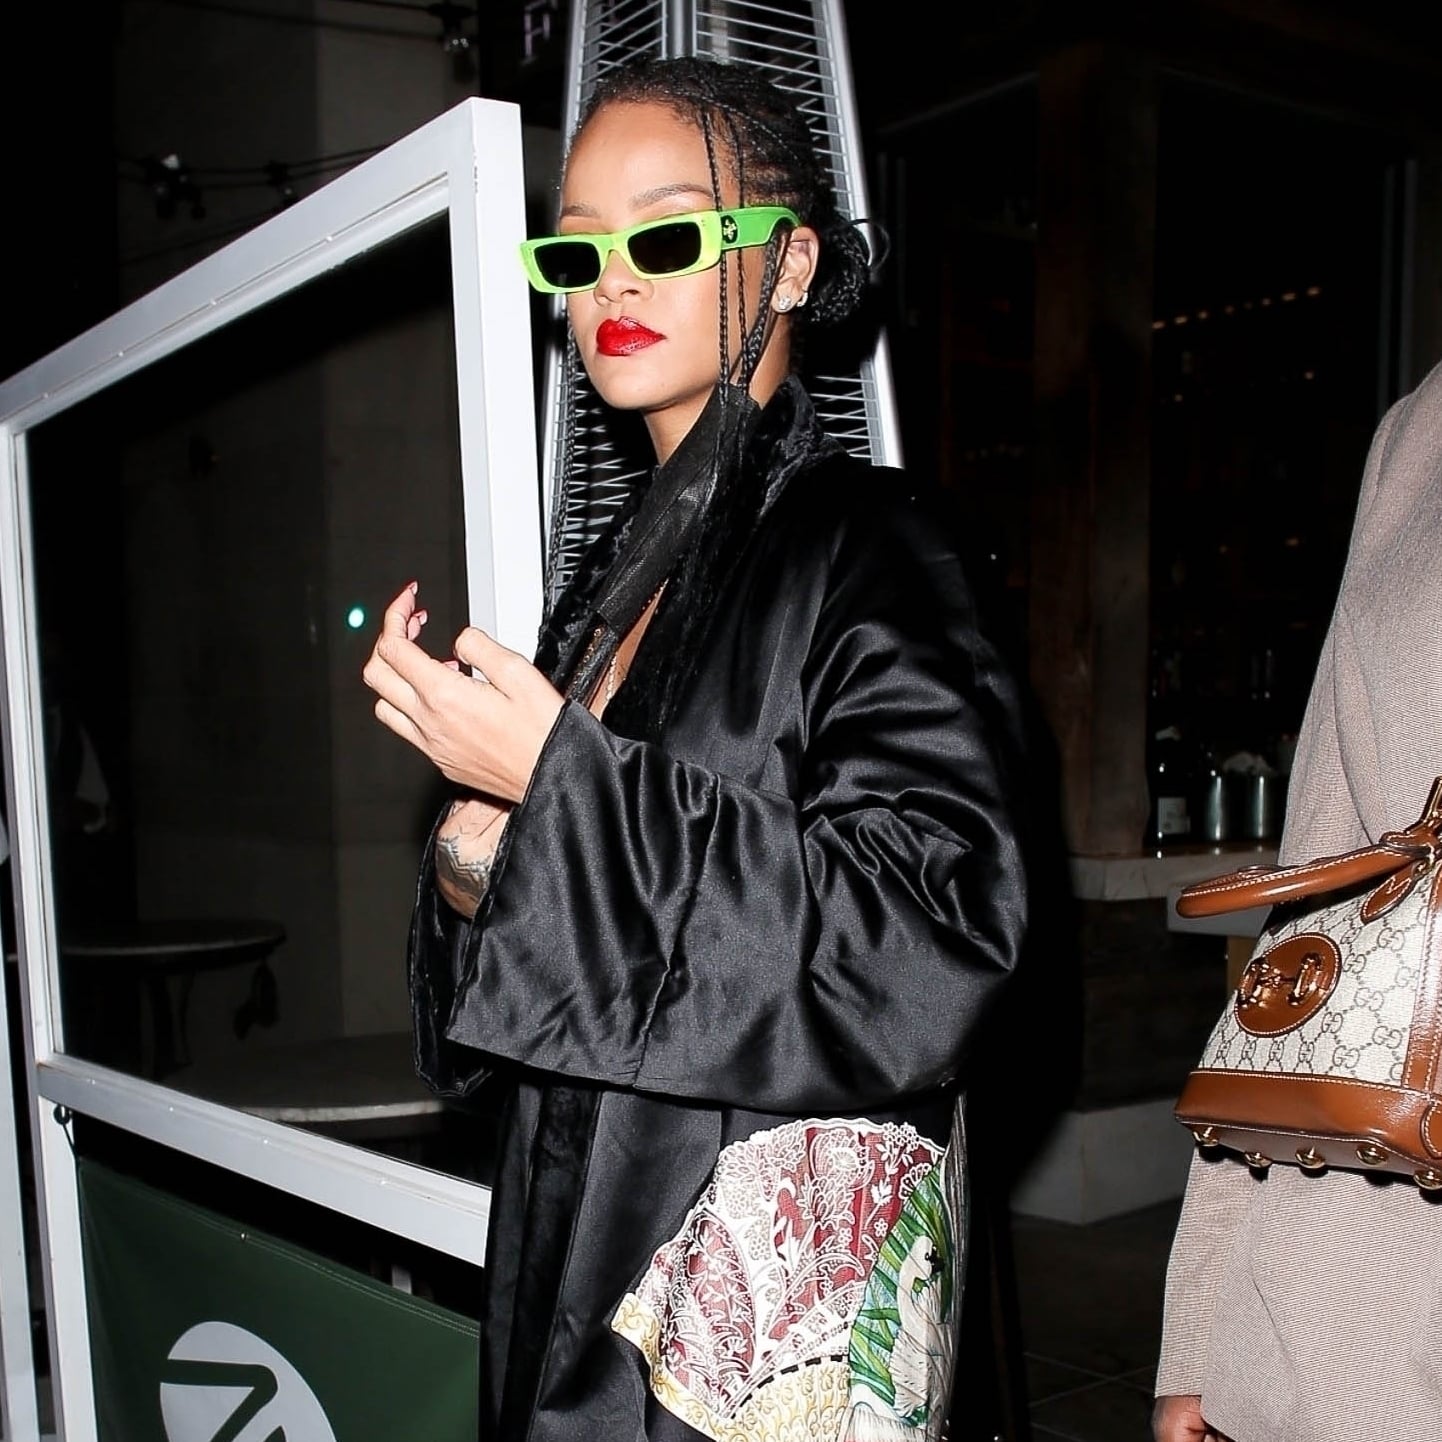 Rihanna wears Chanel and a lace bra to the grocery store